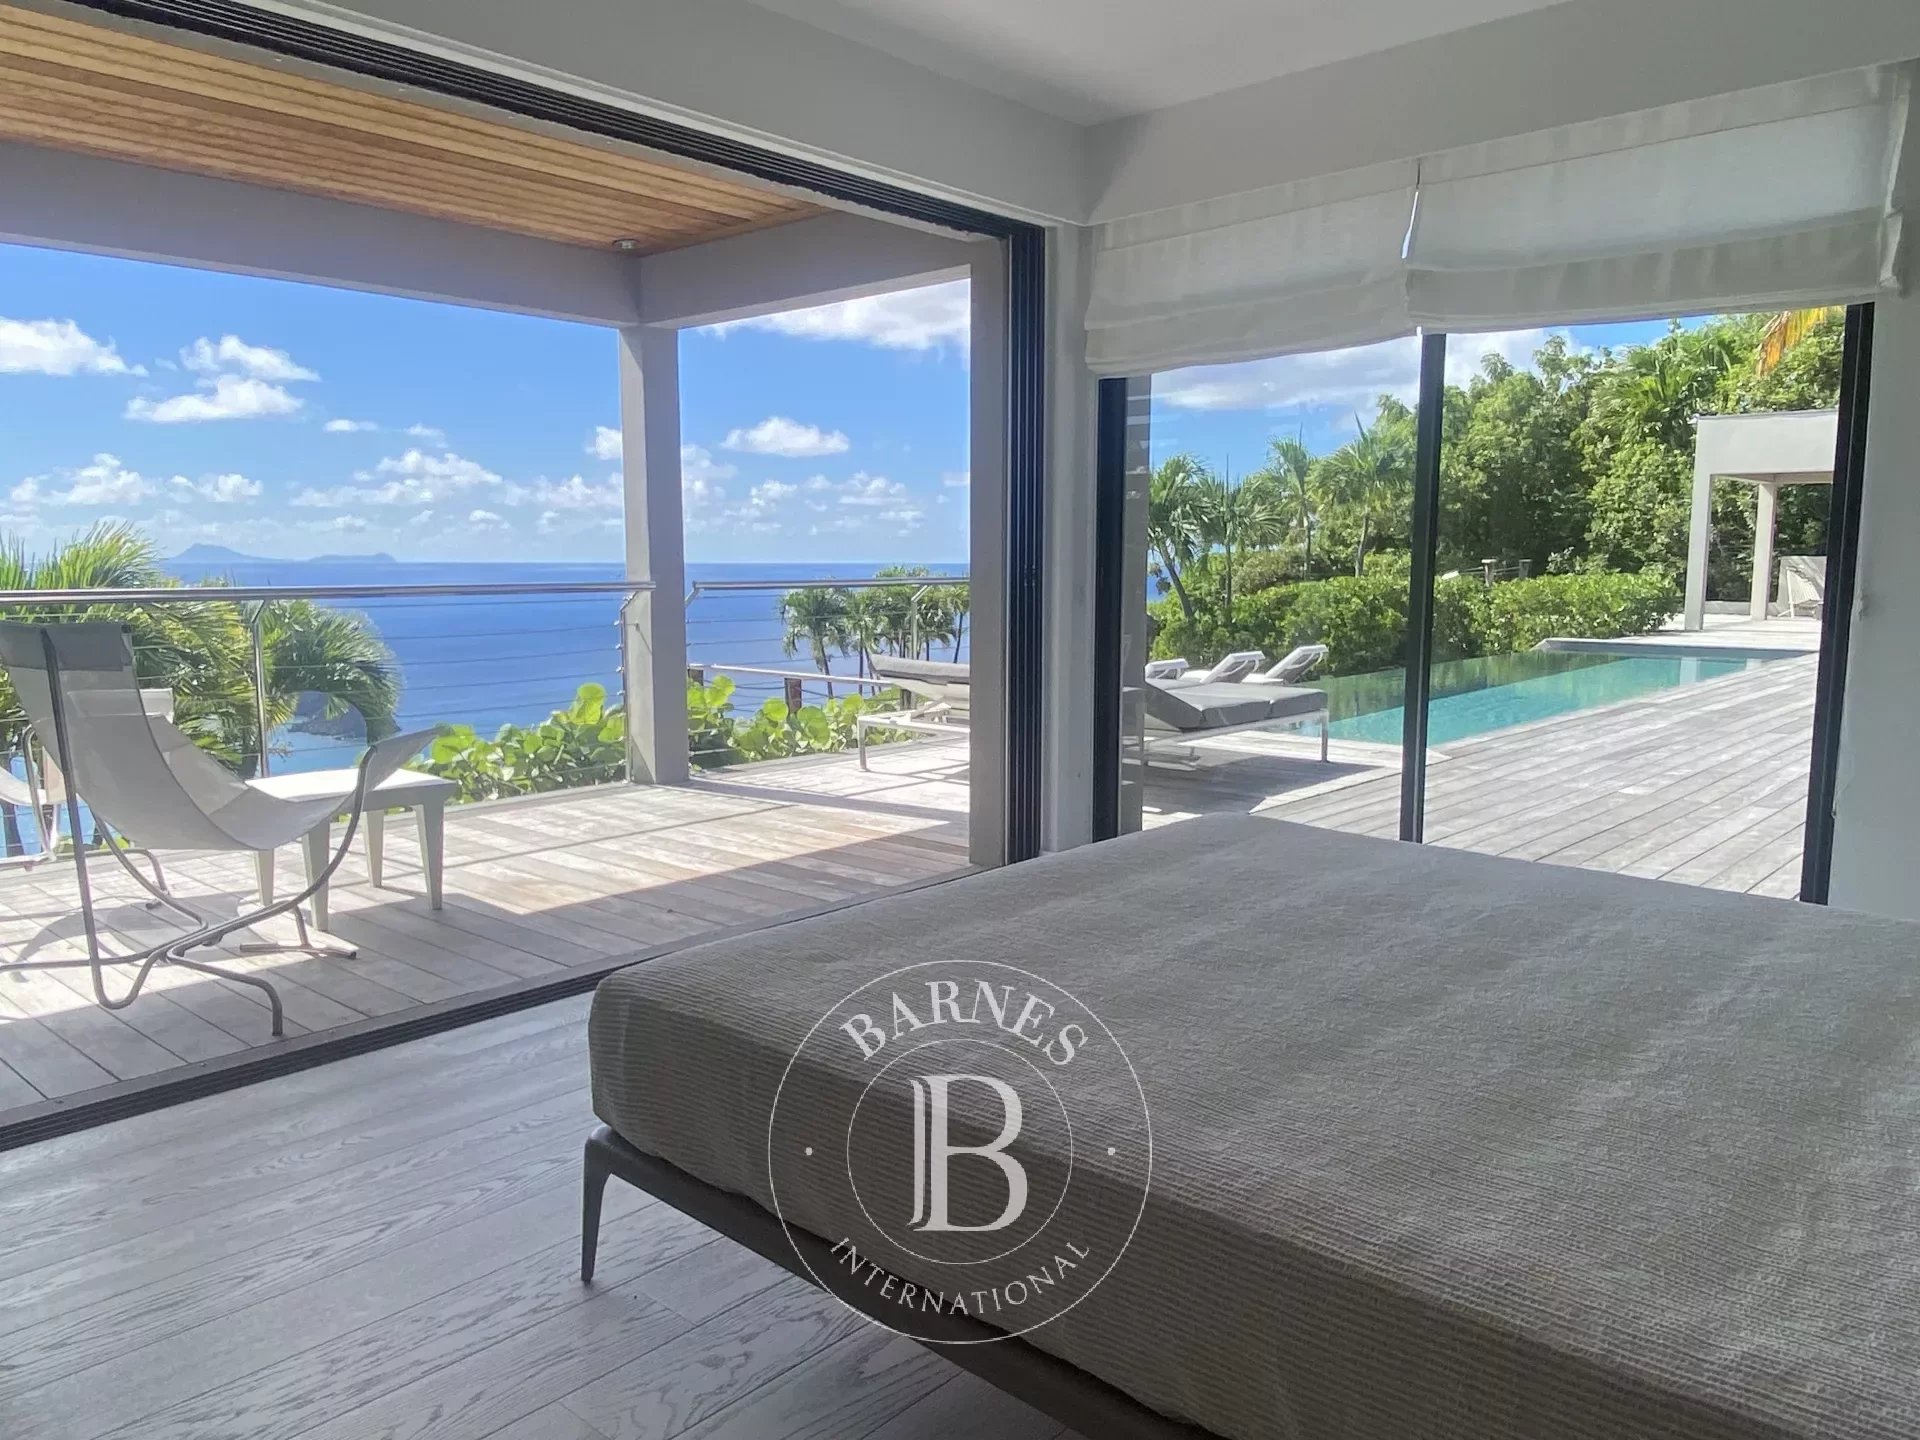 4 -Bedroom Villa in St.Barths - picture 17 title=